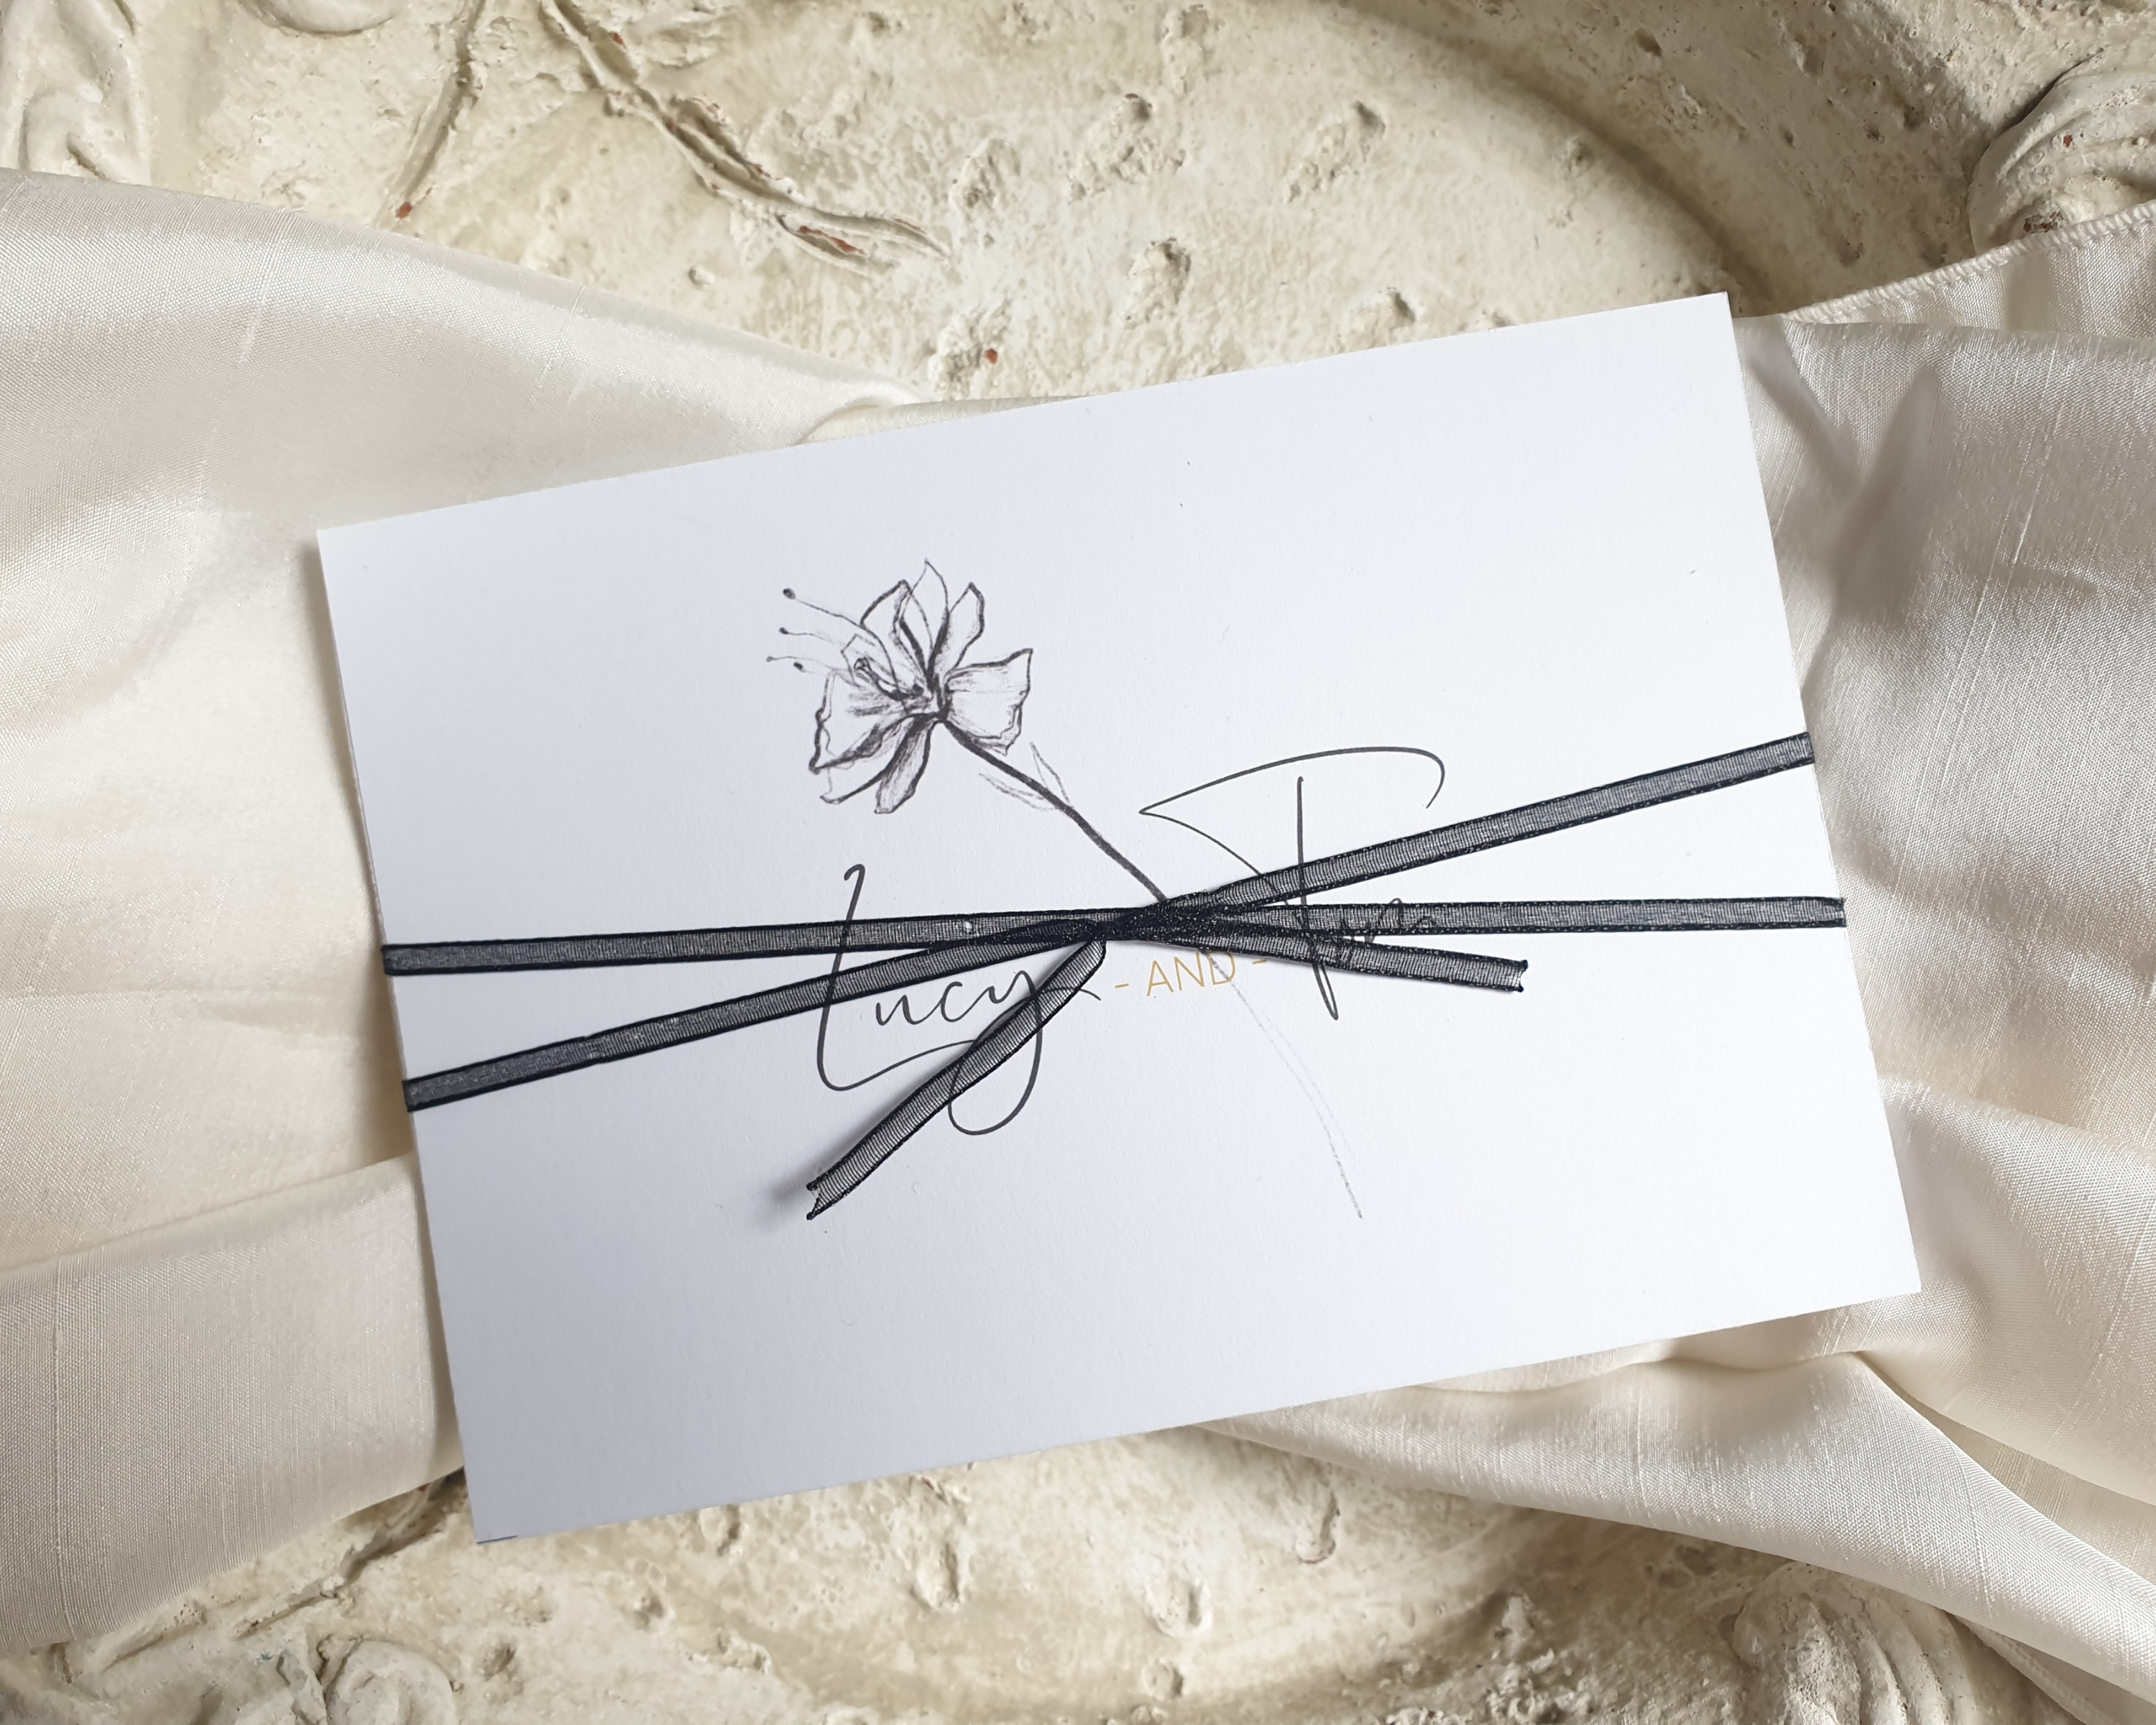 Pencil sketch floral A6 Poppleberry accordion fold all-in-one wedding invitation, folded & wrapped with black ribbon bow.